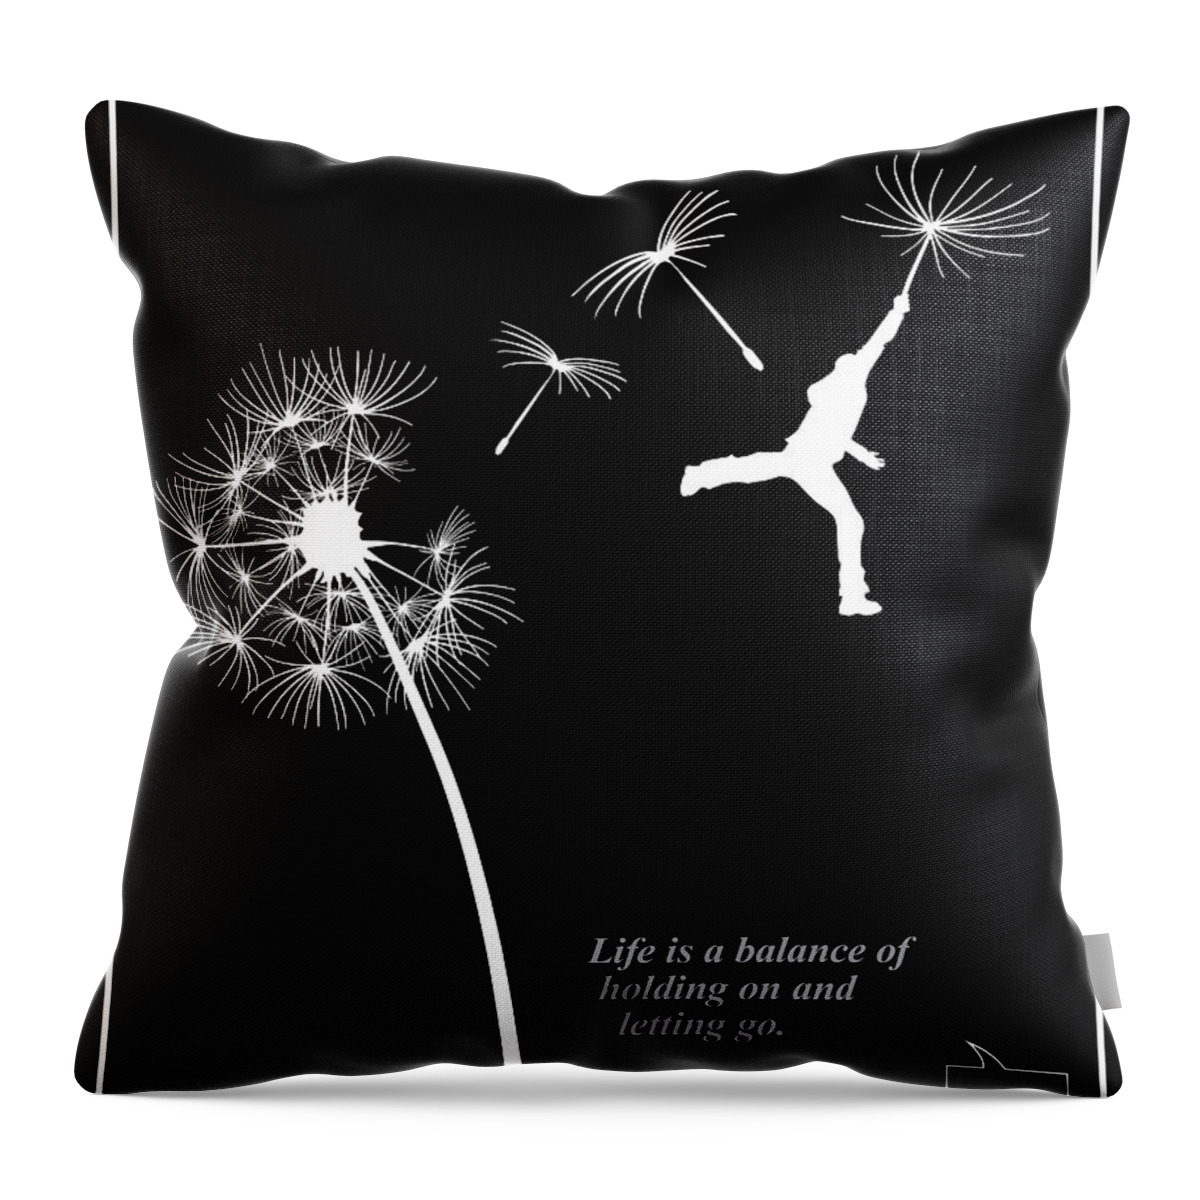 Inspirational Quote Throw Pillow featuring the painting Rumi Inspirational quote by Sassan Filsoof